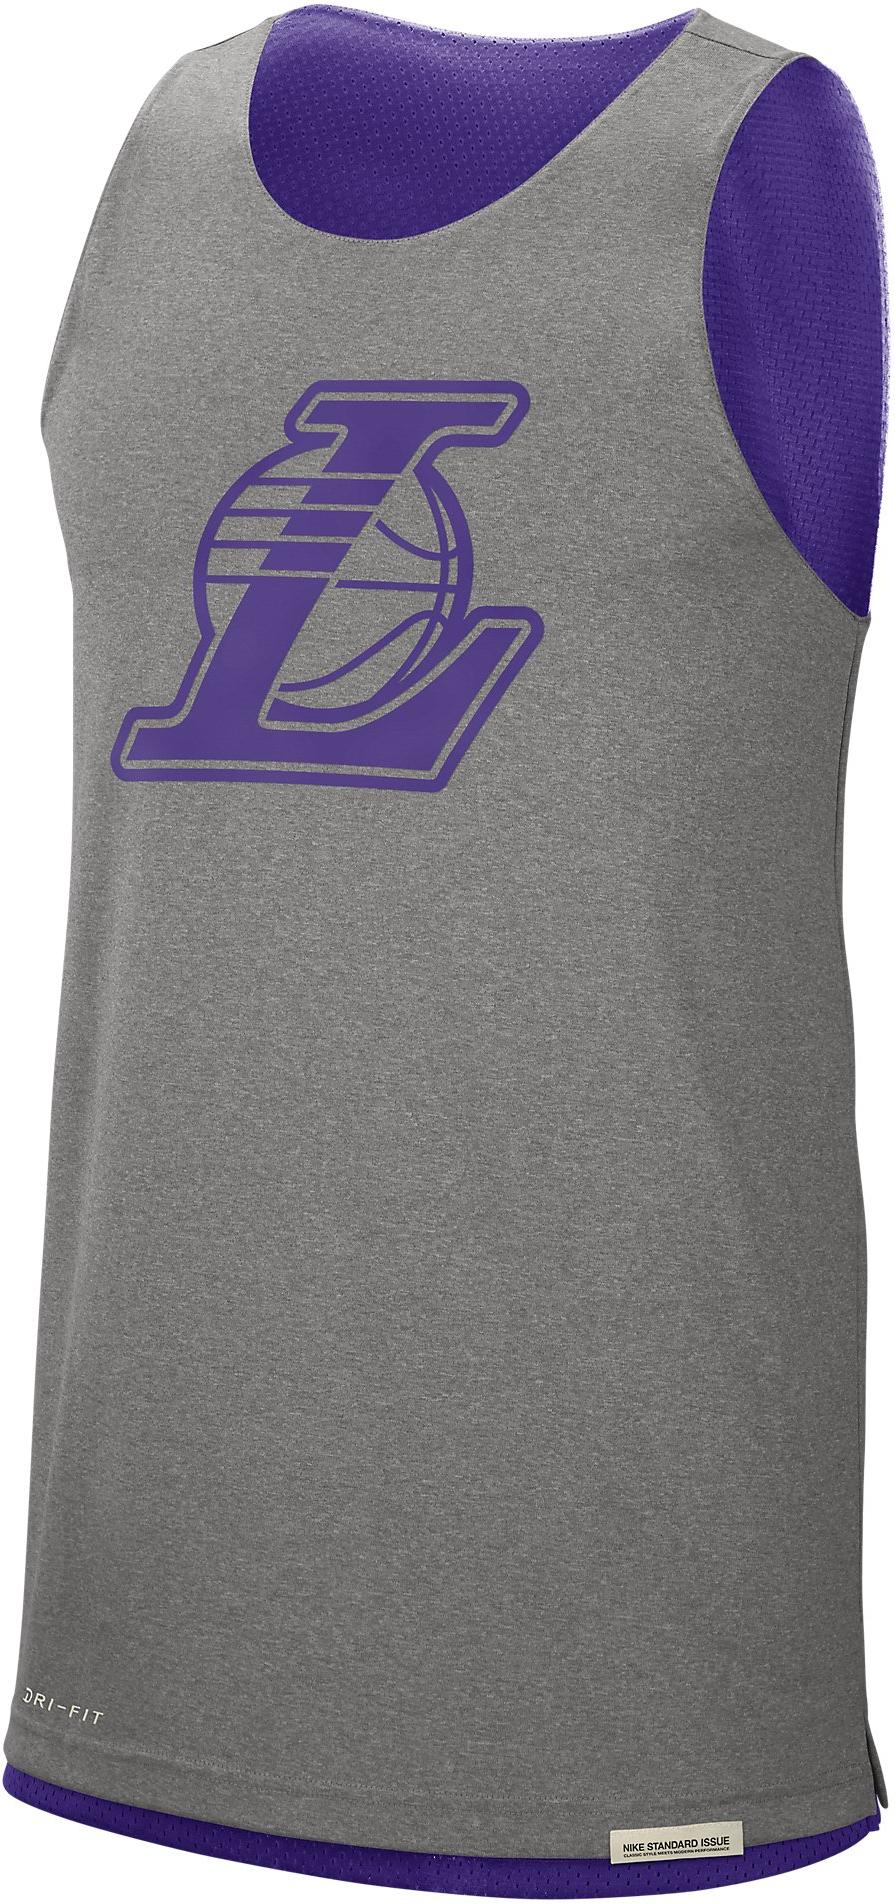 Риза Nike LAL M NK STD ISSUE TANK CTS